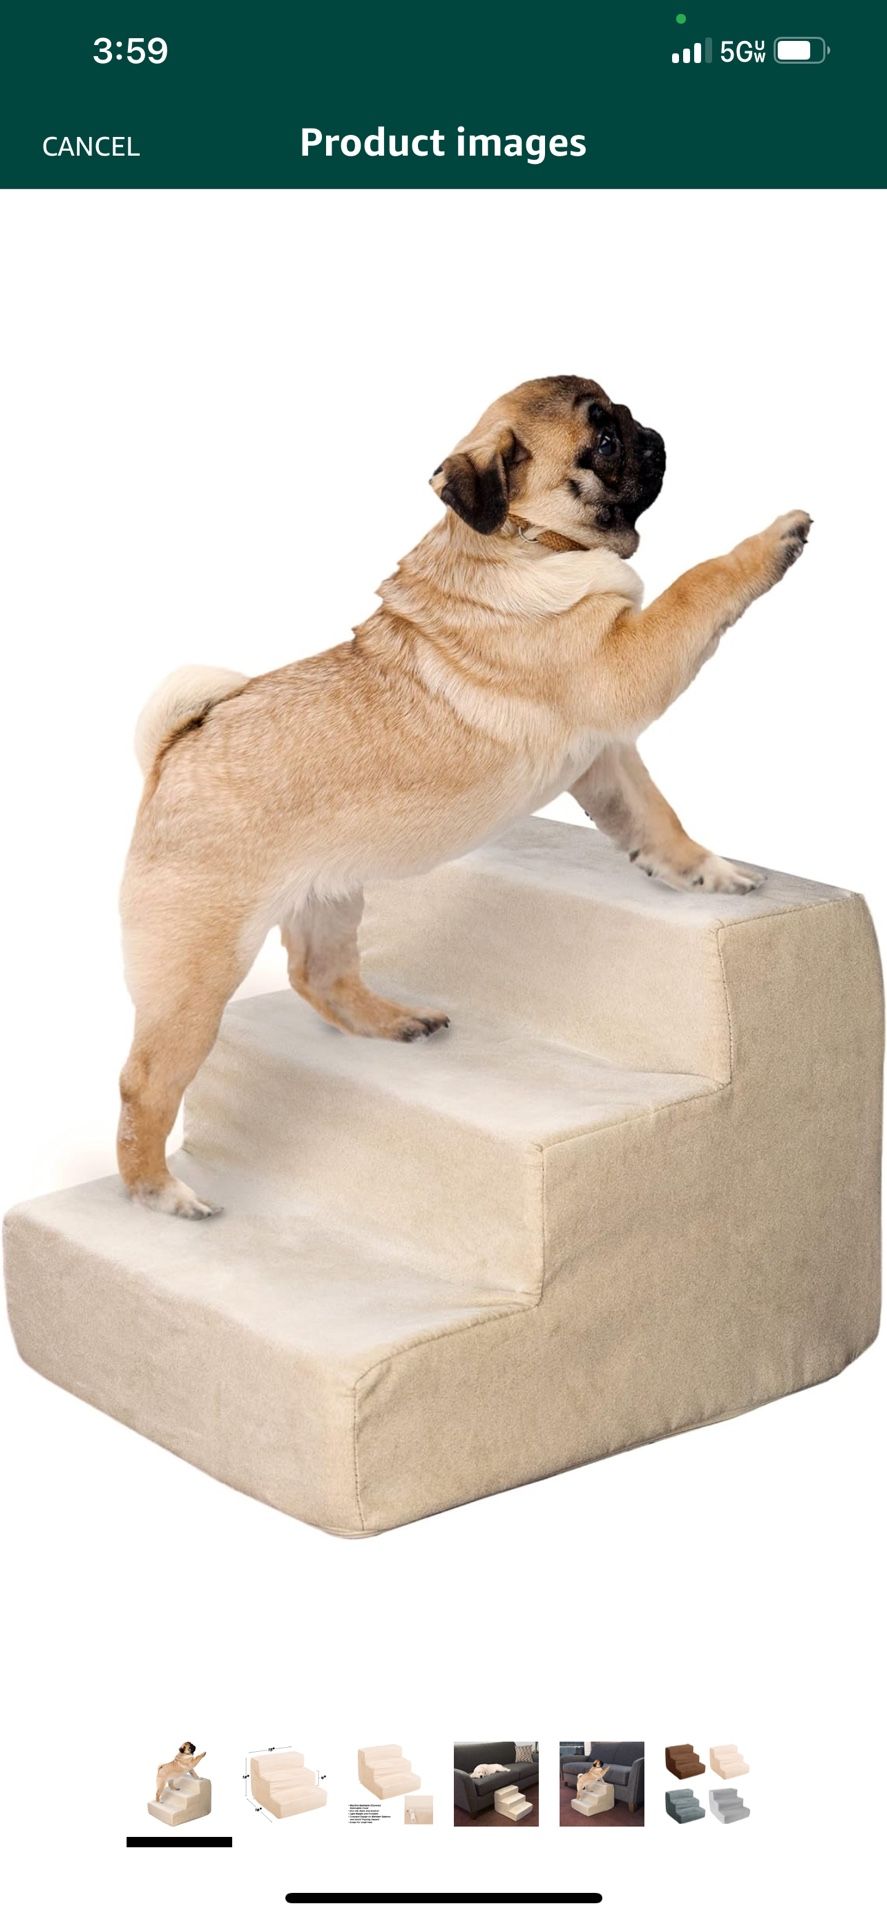 3-Step Pet Stairs - Nonslip Foam Dog and Cat Steps with Removable Zippered Microfiber Cover - 2-Tone Design for Home or Vehicle Use by PETMAKER (Tan)